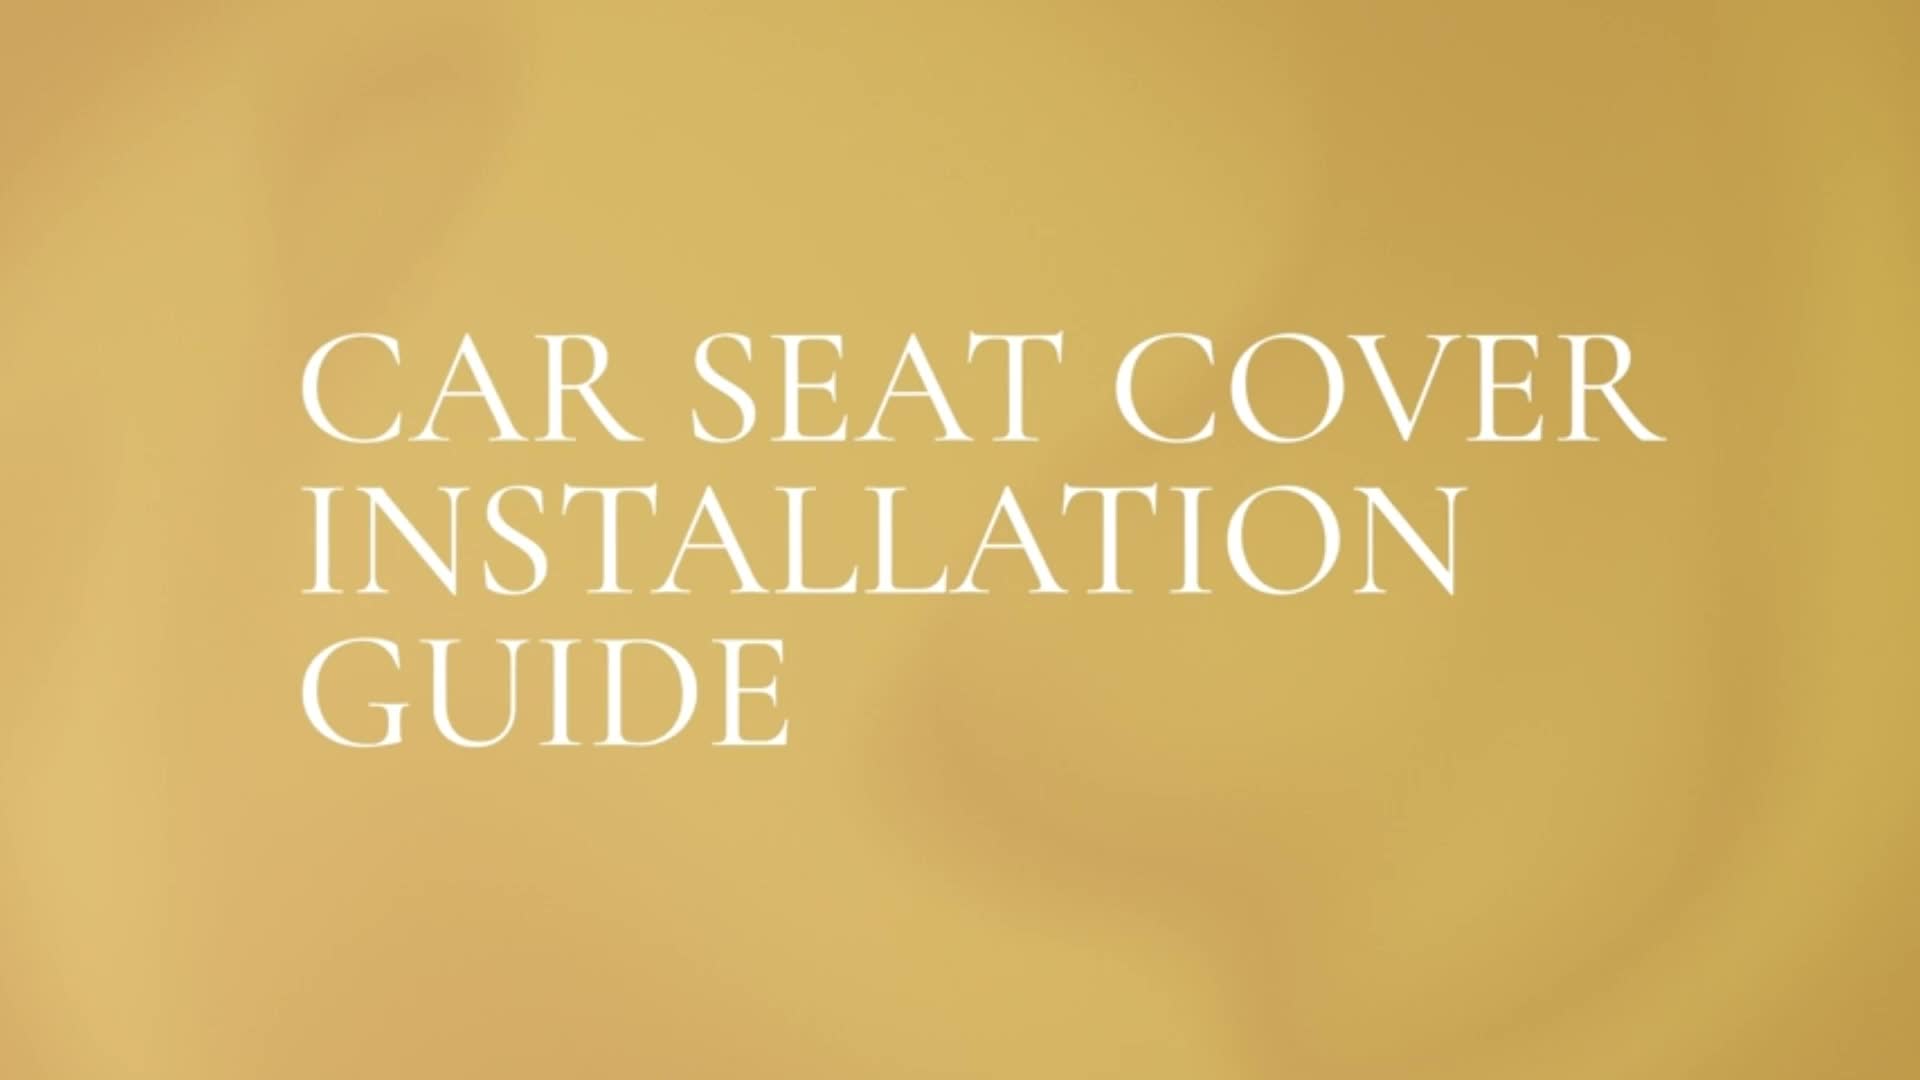 The 10 Best Car Accessories 2023. 1. Seat Covers, by Maskjessica